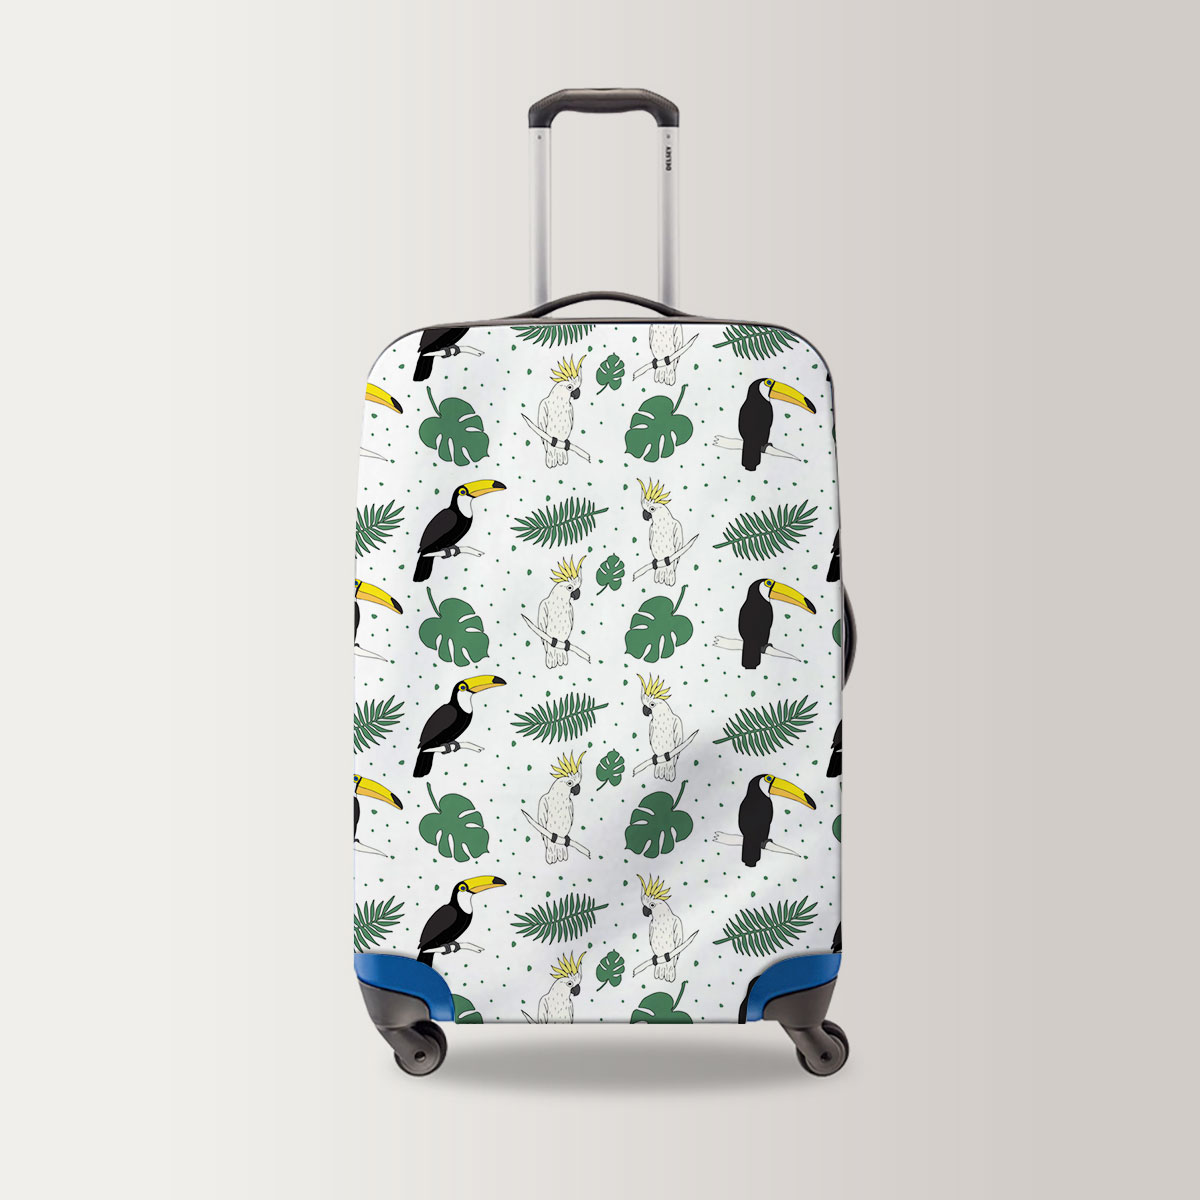 Tropical Toucan On White Background Luggage Bag